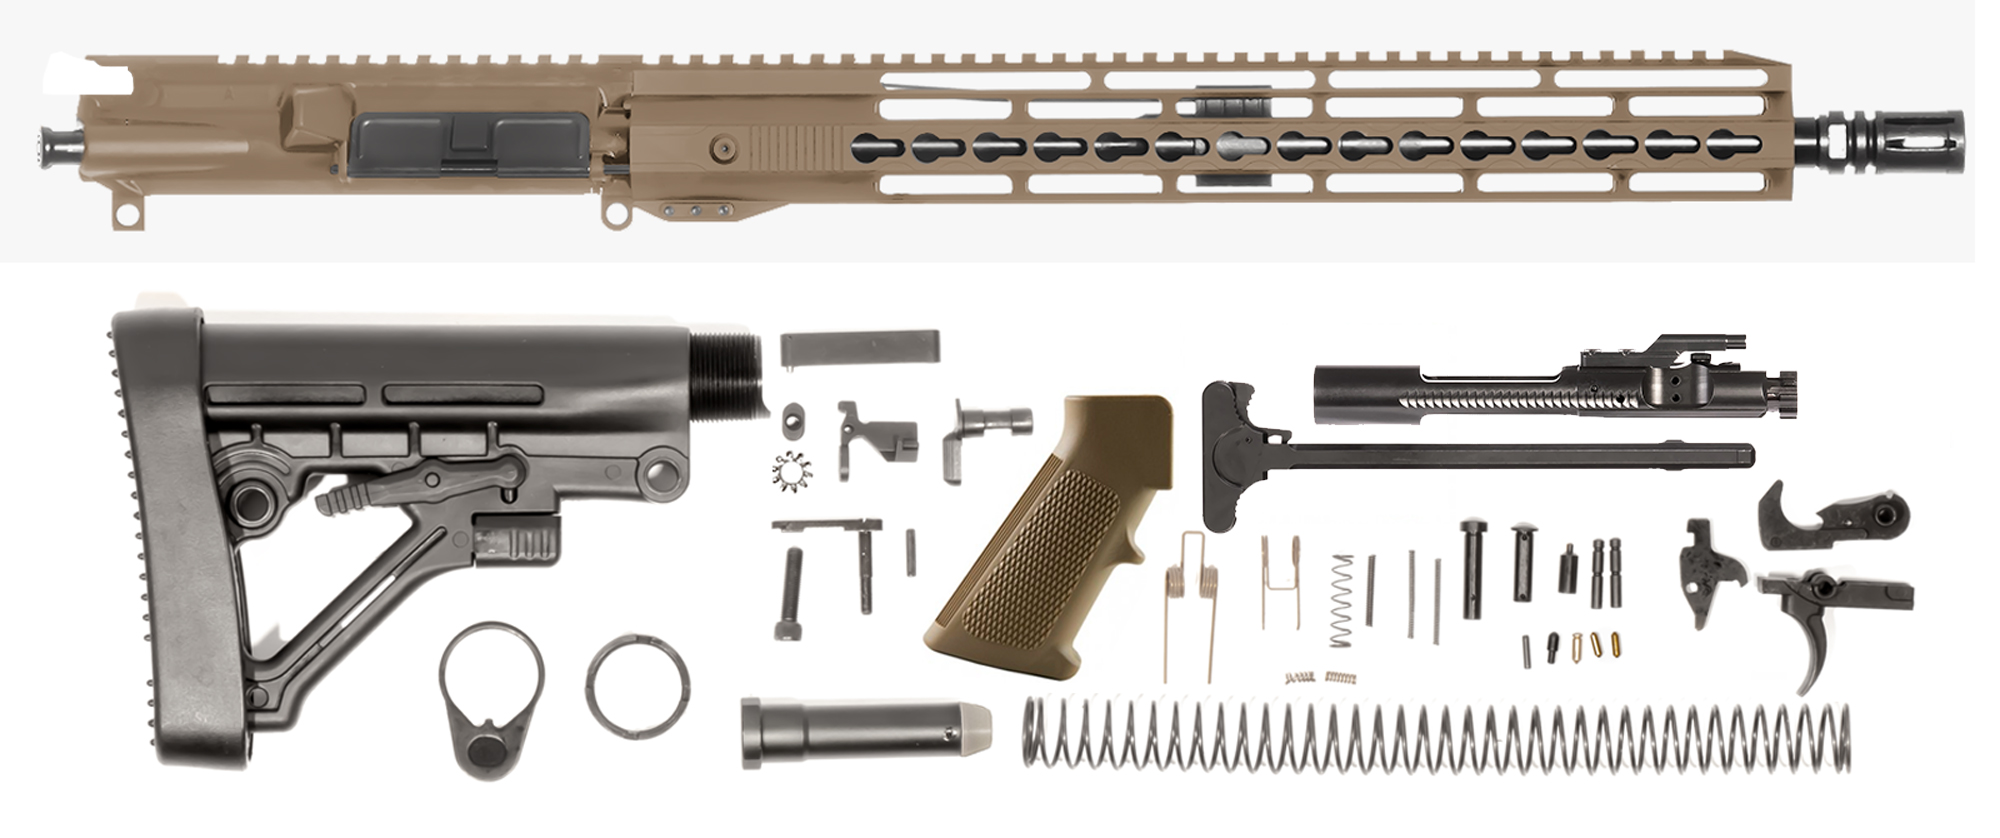 sportsman-guide-16?-5-56-nato-18-15?-unmarked-keymod-bolt-carrier-group-charging-handle-ar-15-buttstock-kit-ar-15-lower-parts-kit-coyote-brown